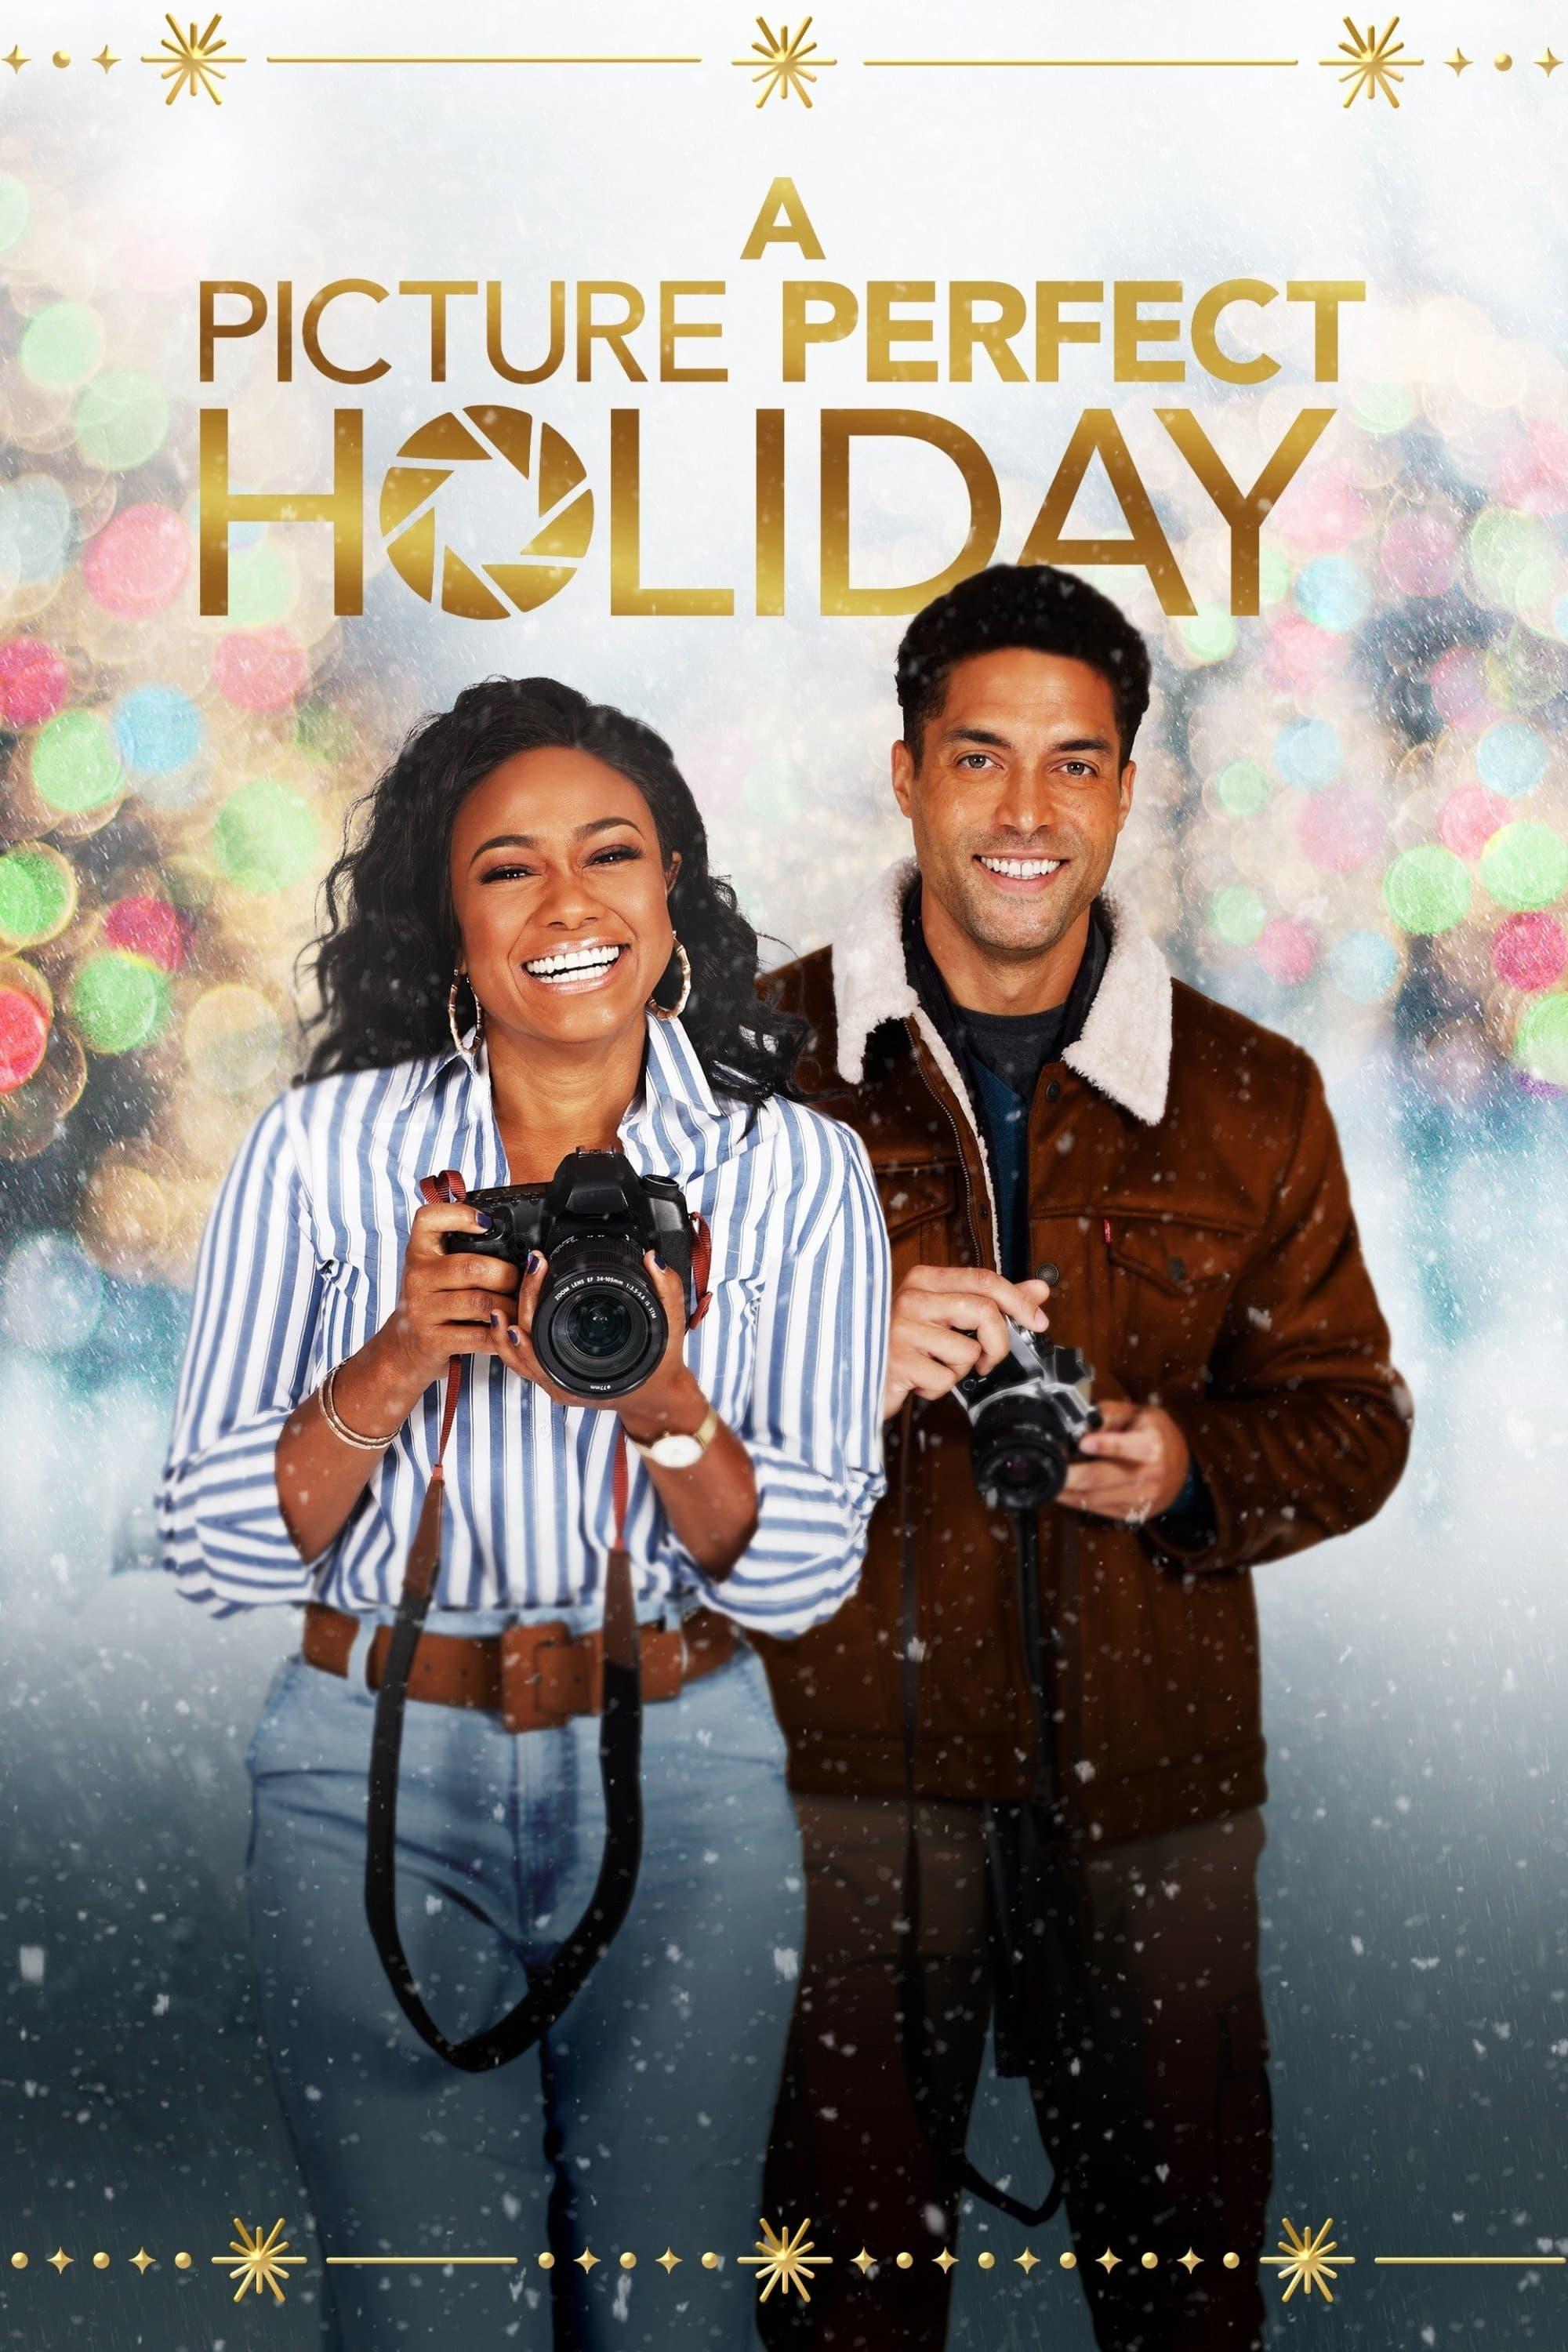 A Picture Perfect Holiday poster